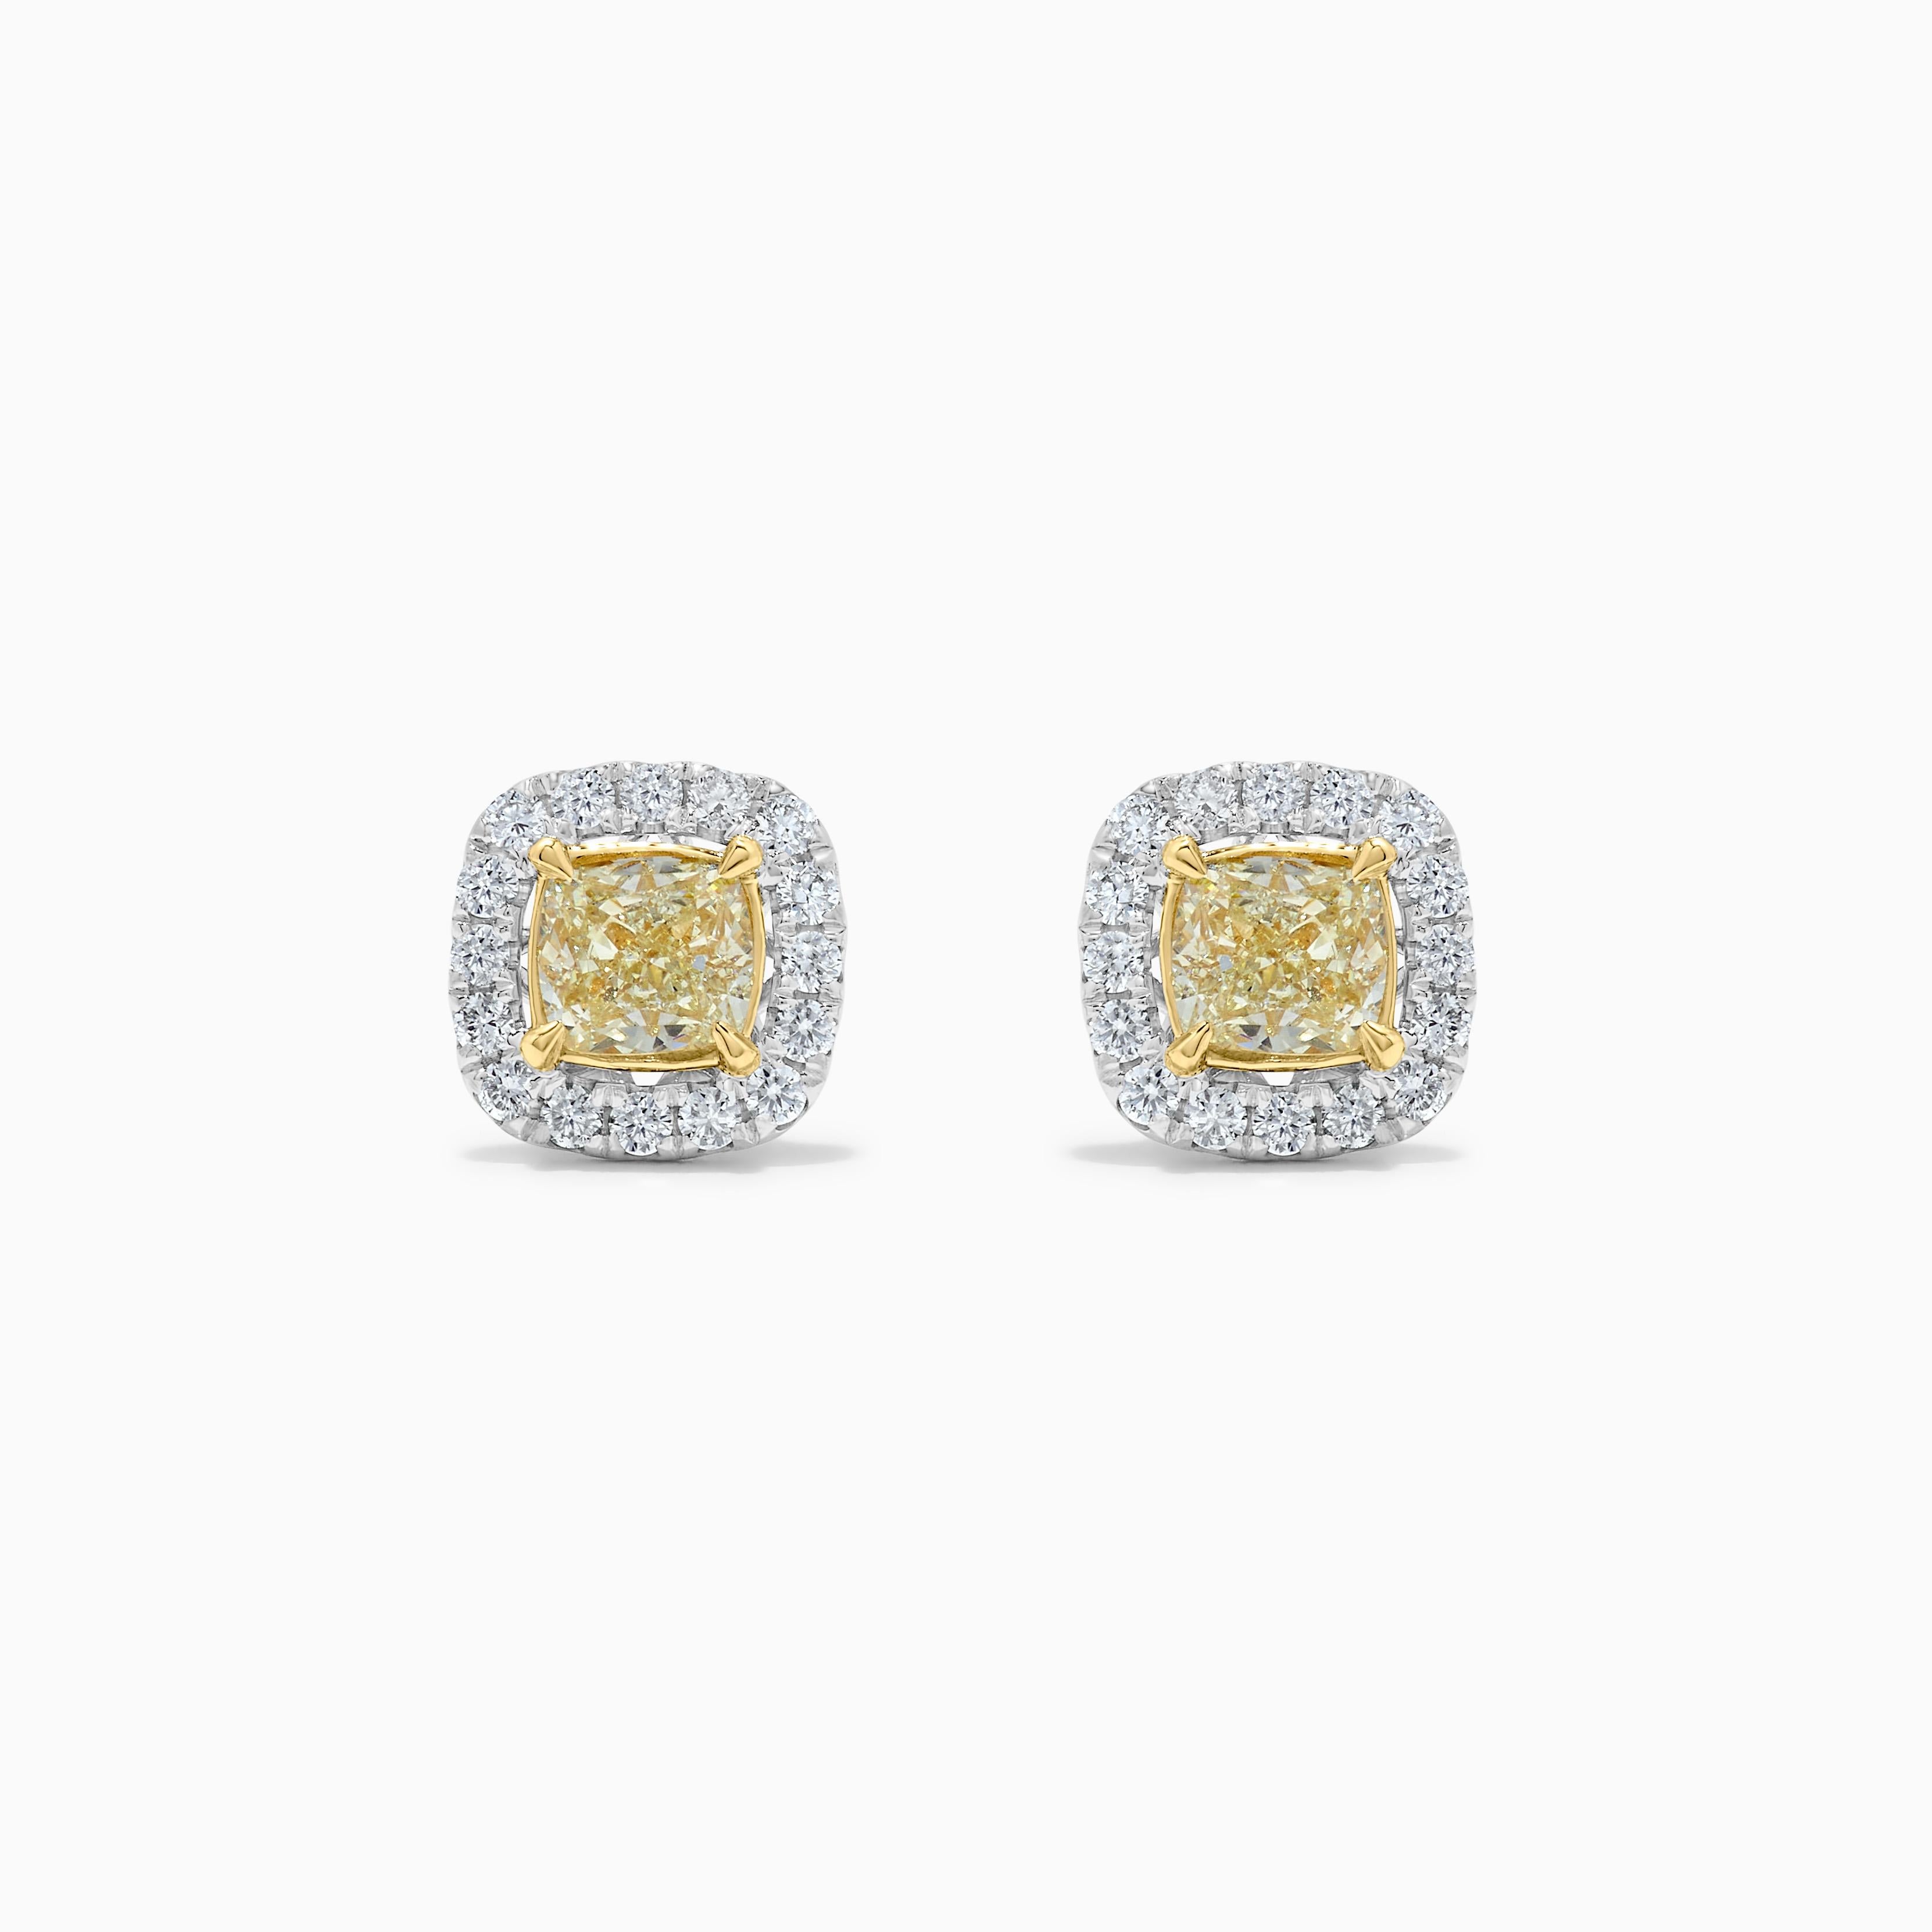 Contemporary Natural Yellow Cushion Diamond 1.84 Carat TW Gold Stud Earrings For Sale